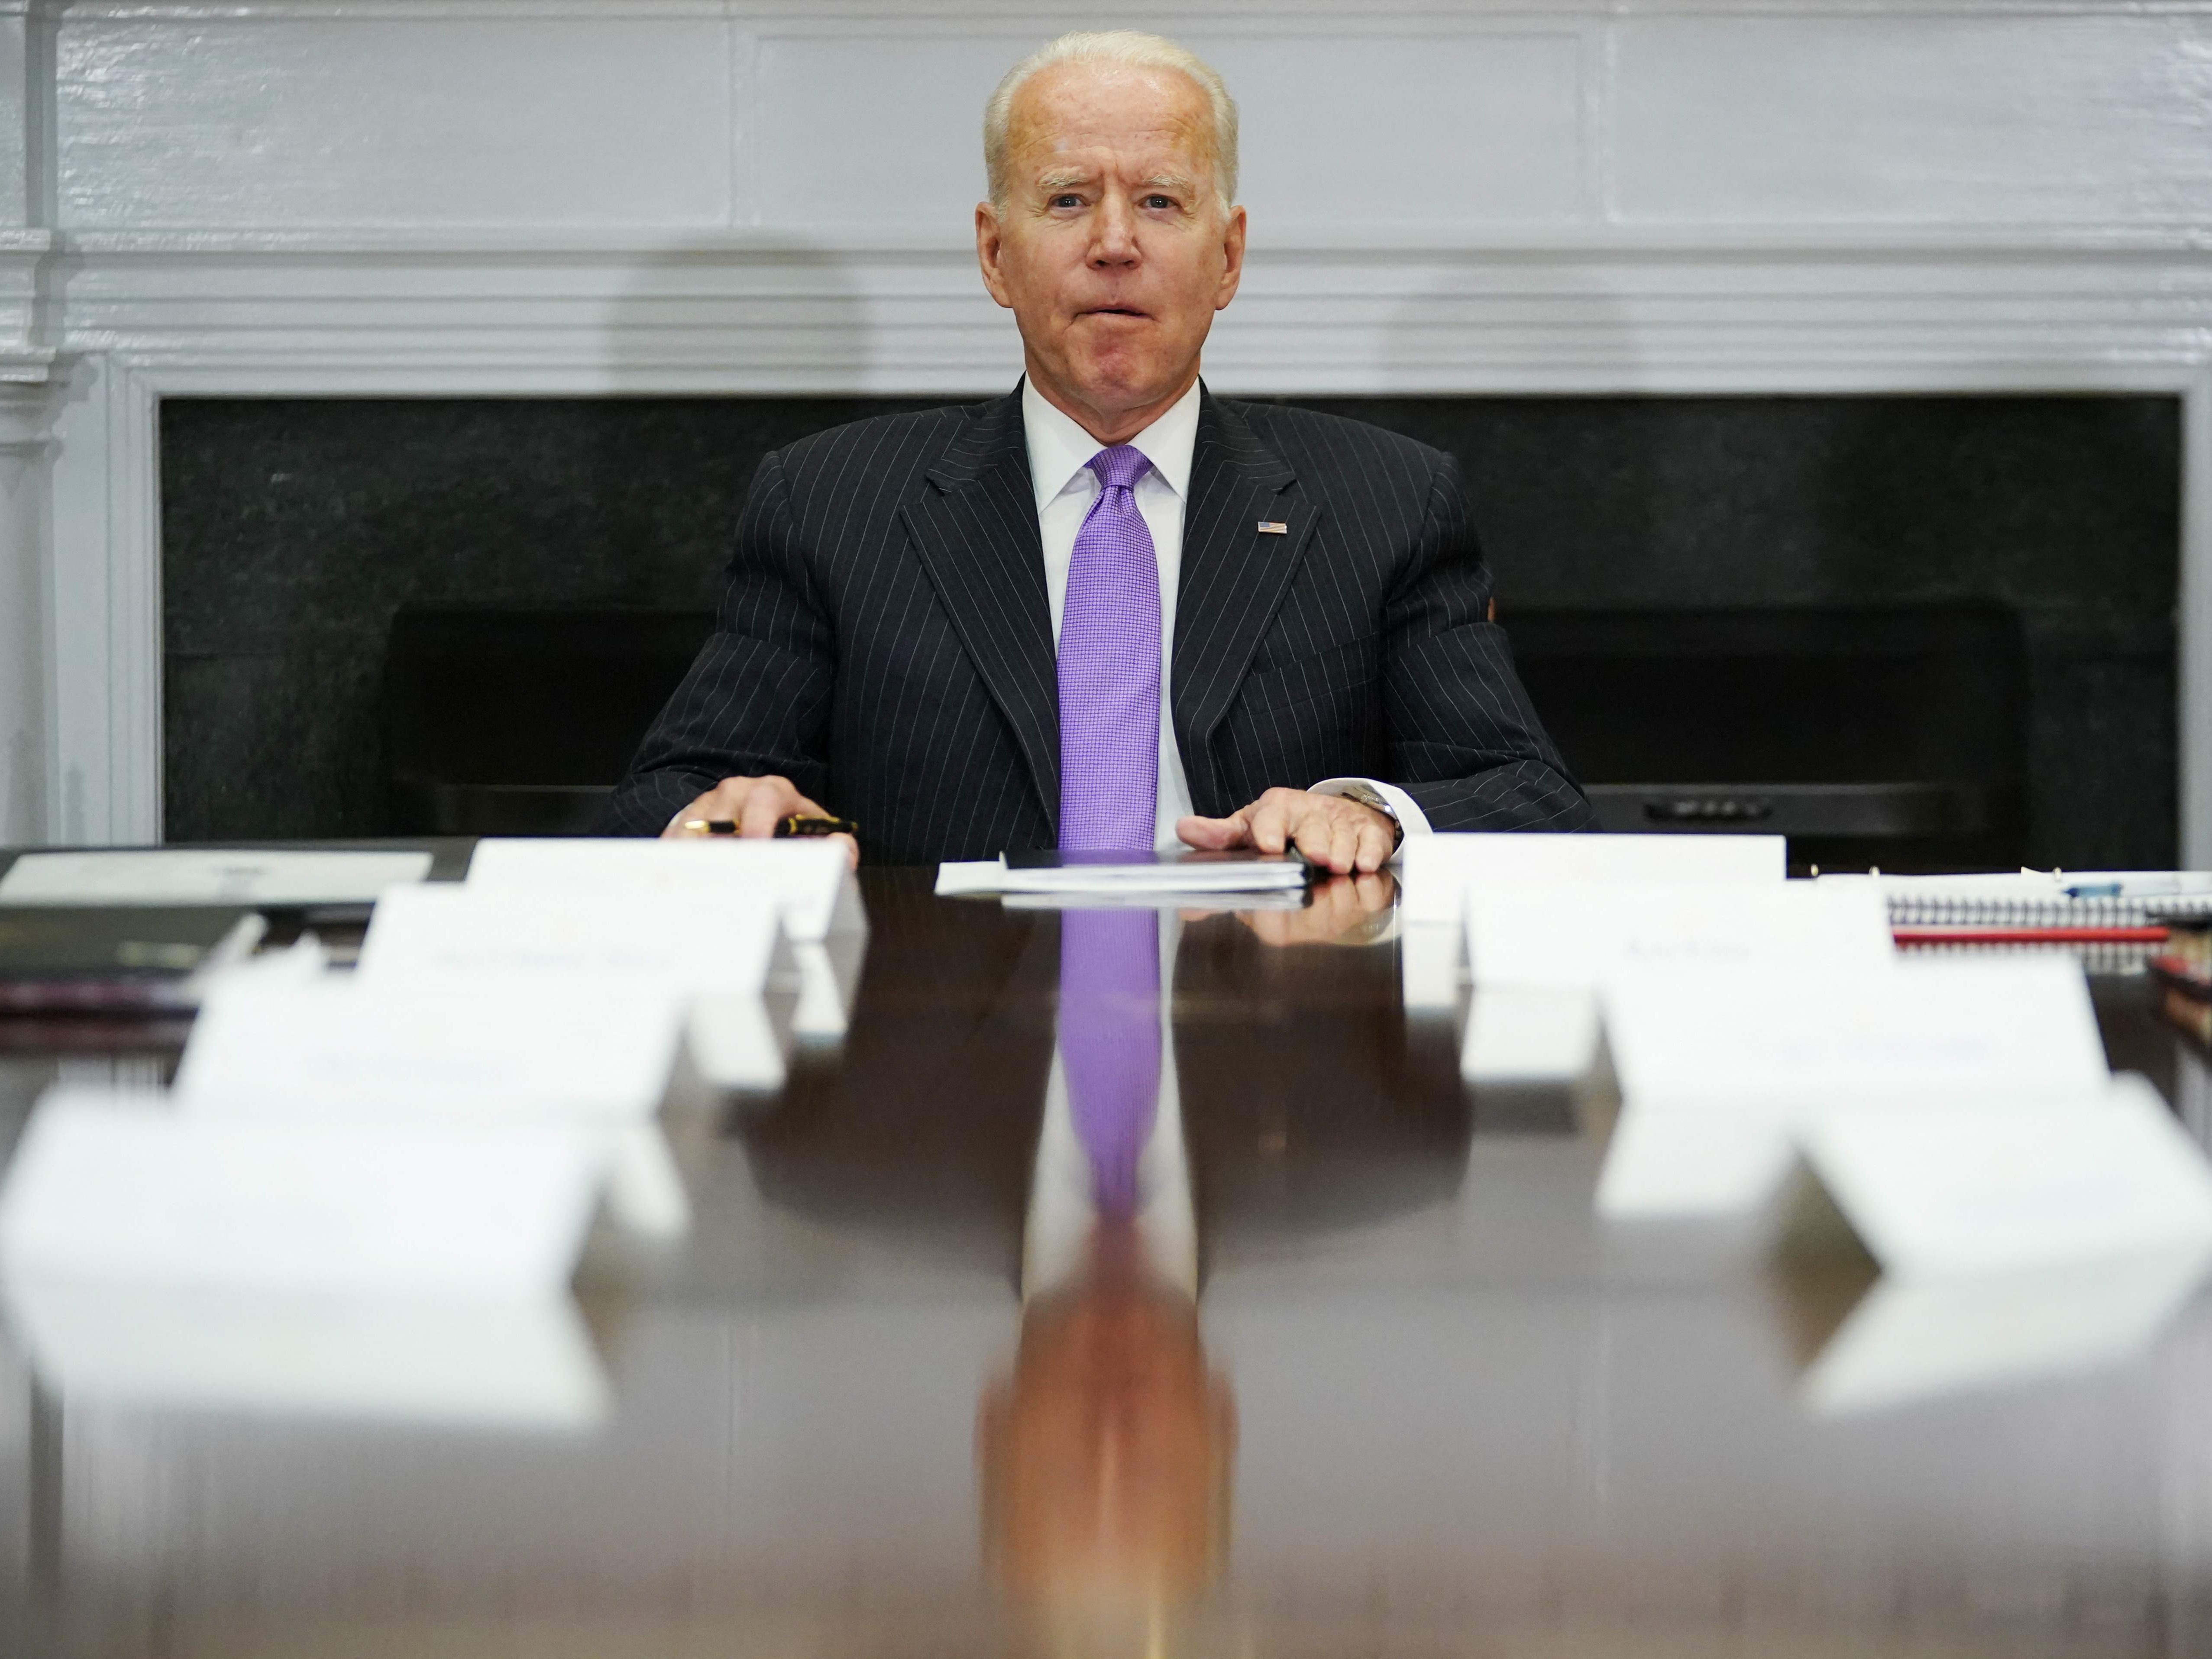 Joe Biden heads a meeting in the White House on Tuesday